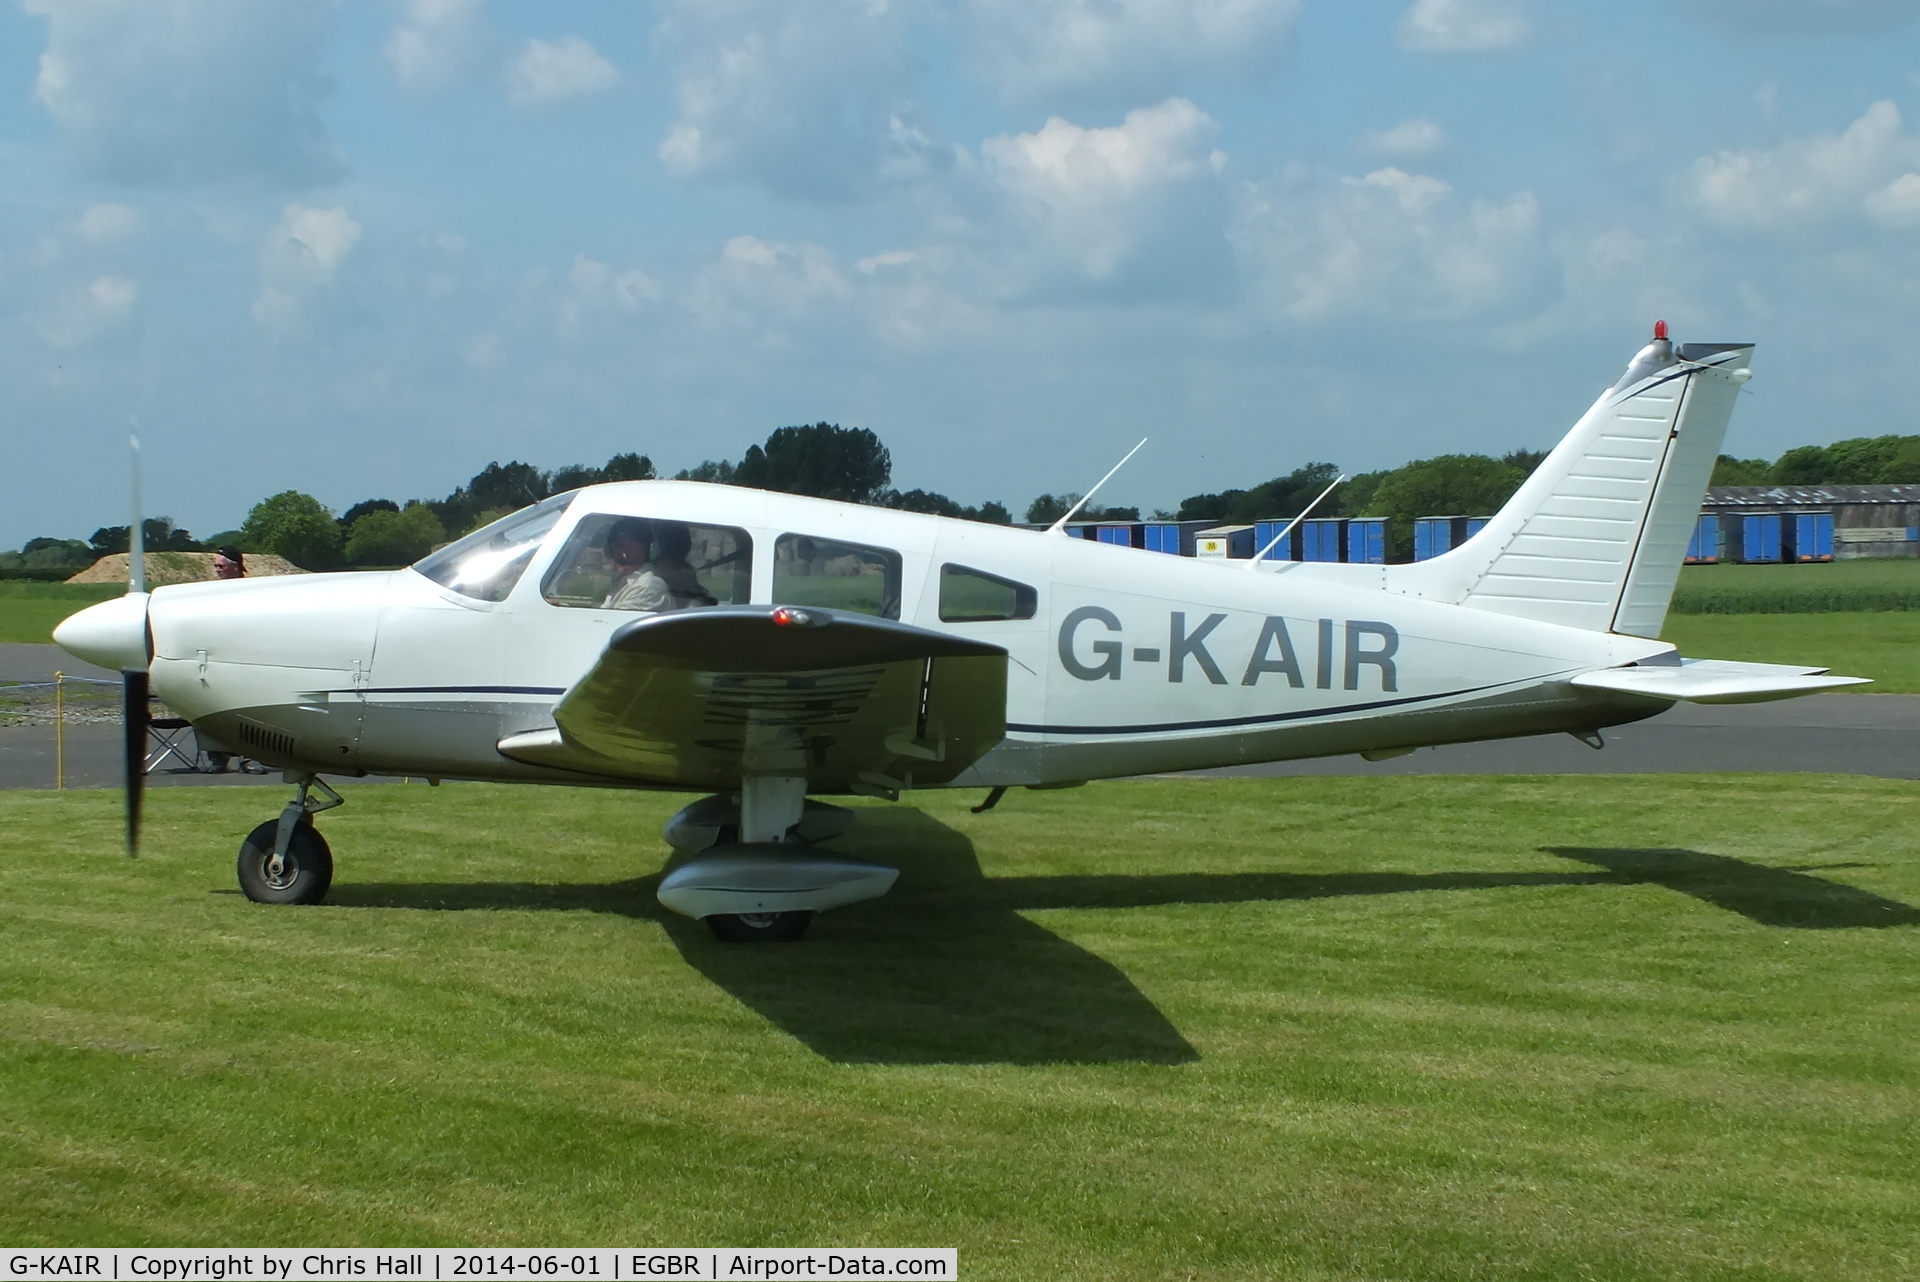 G-KAIR, 1978 Piper PA-28-181 Cherokee Archer II C/N 28-7990176, at Breighton's Open Cockpit & Biplane Fly-in, 2014